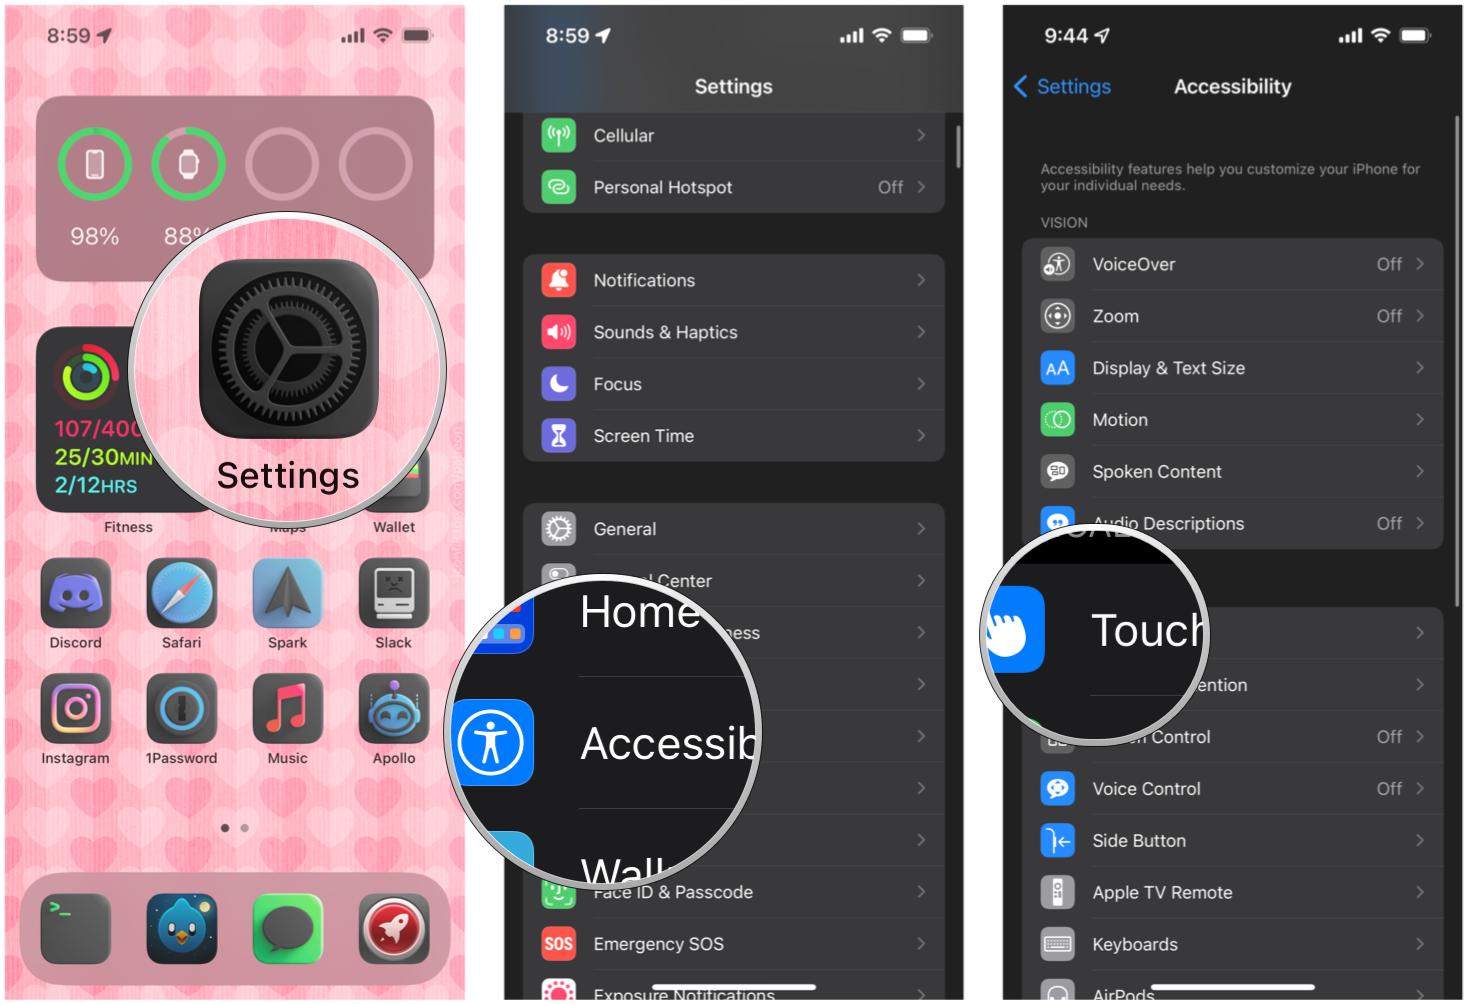 How to use the Back Tap gesture on iPhone by showing: Launch Settings, tap Accessibility, tap Touch